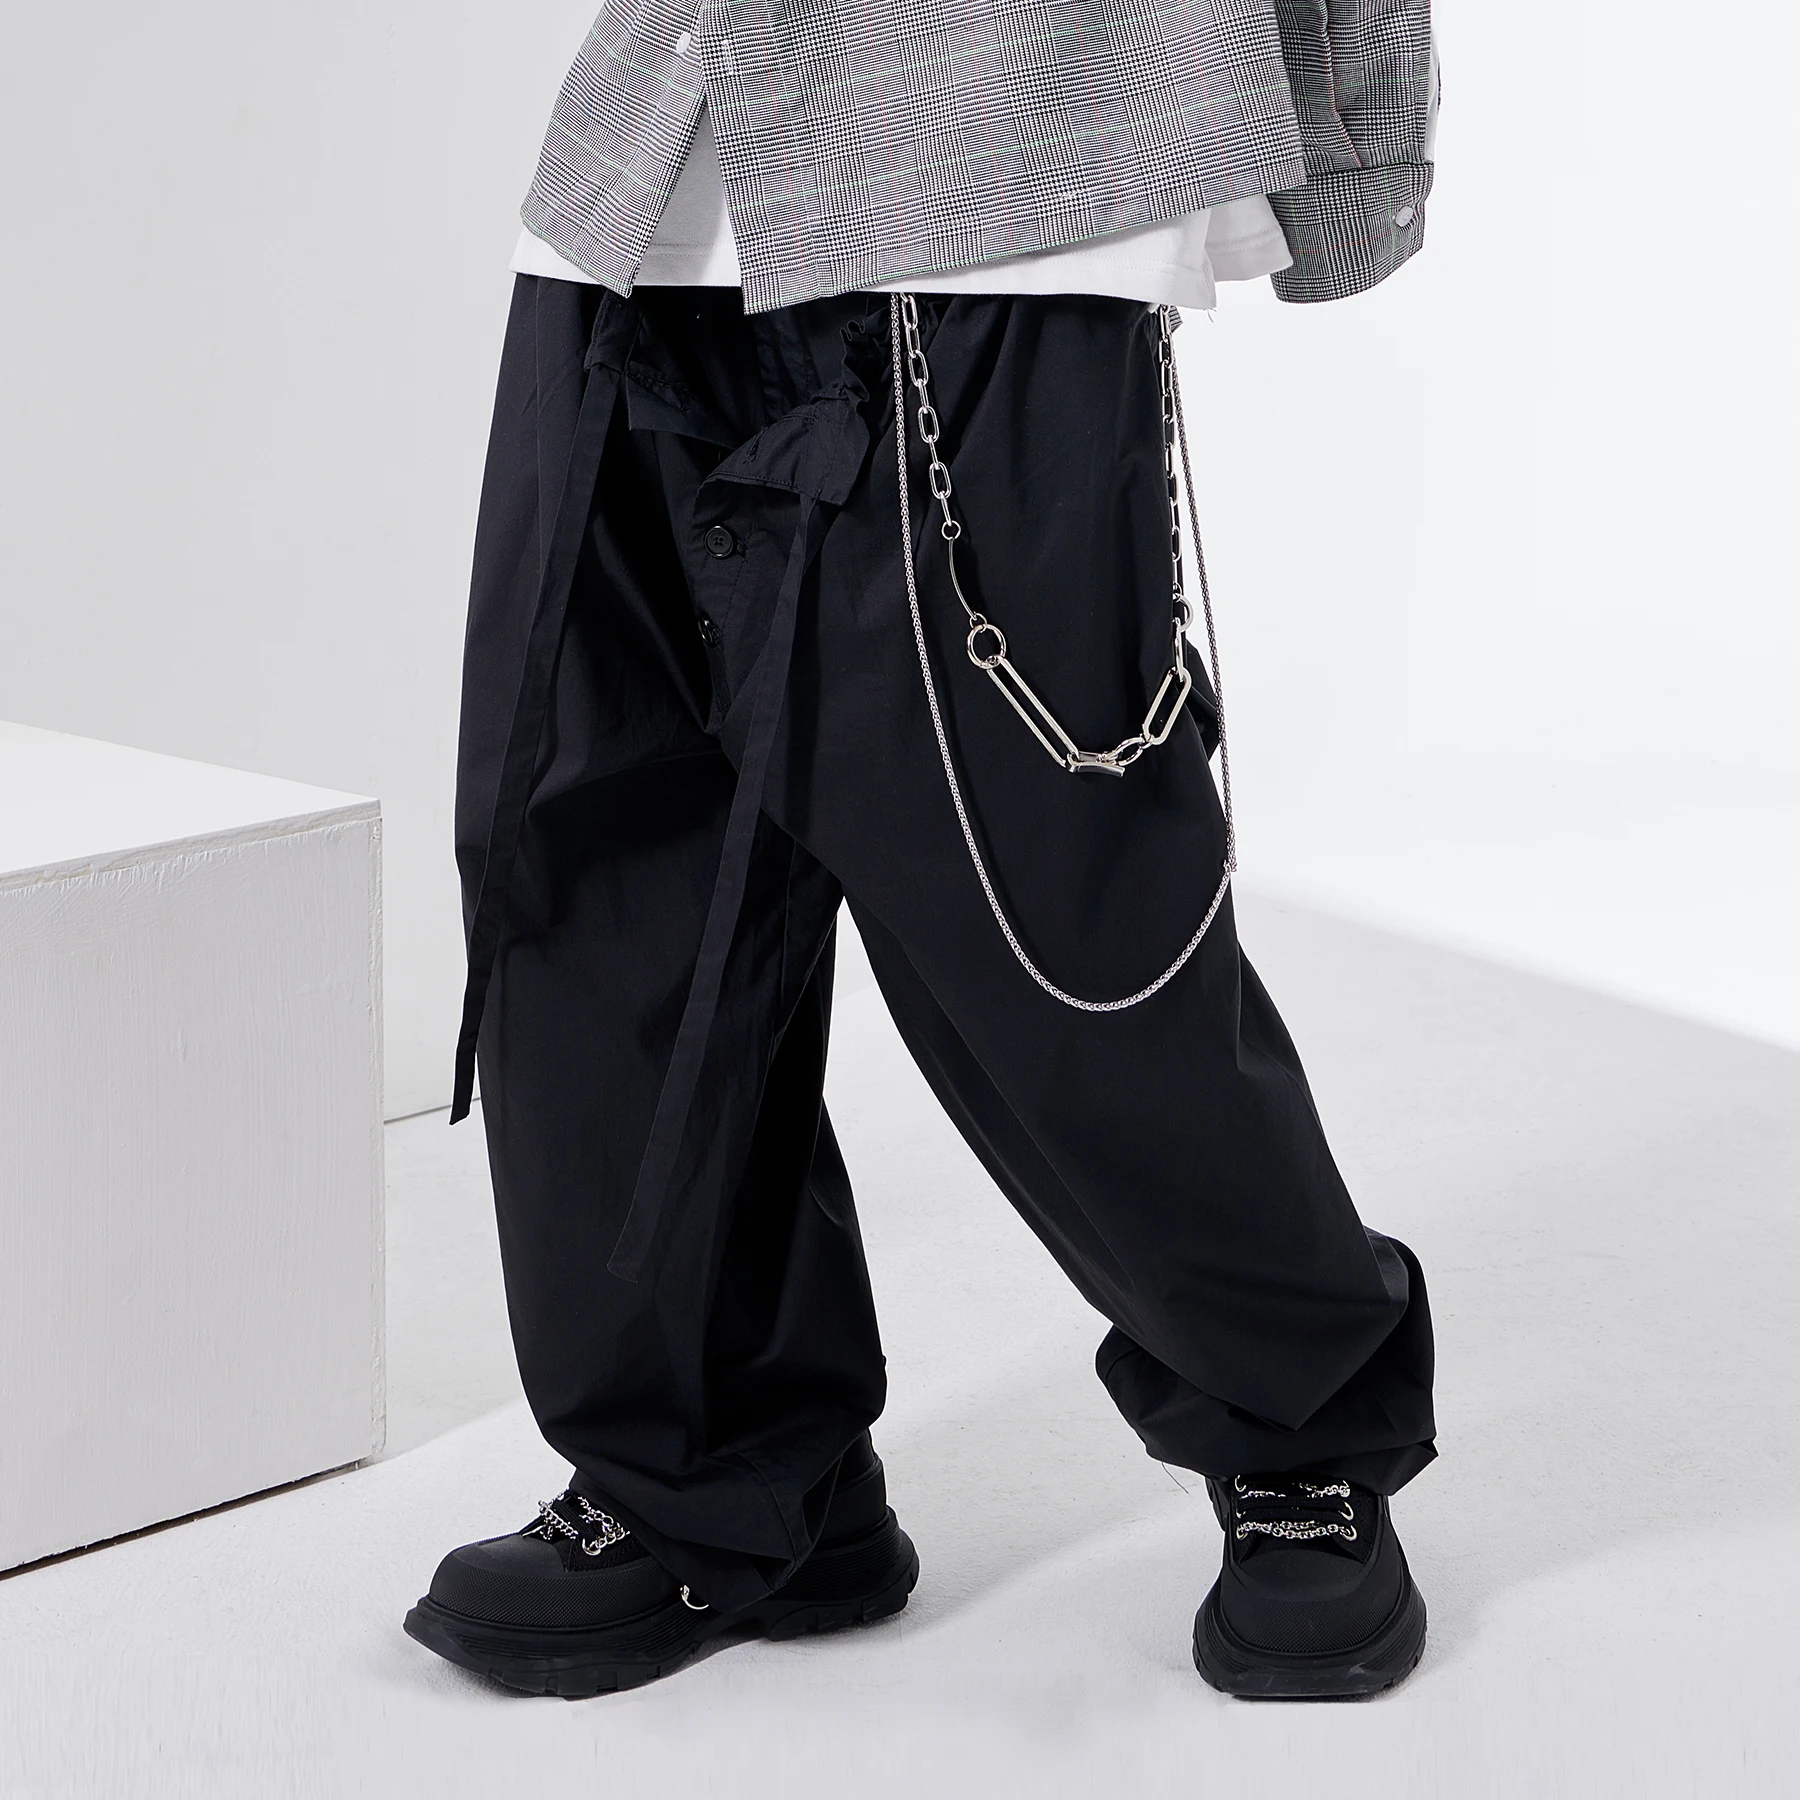 27-46 2022 NEW Men Women's Clothing Hip Hop Fake Two Piece Streamer Deconstructed Slacks Overalls Pants Plus Size Costumes